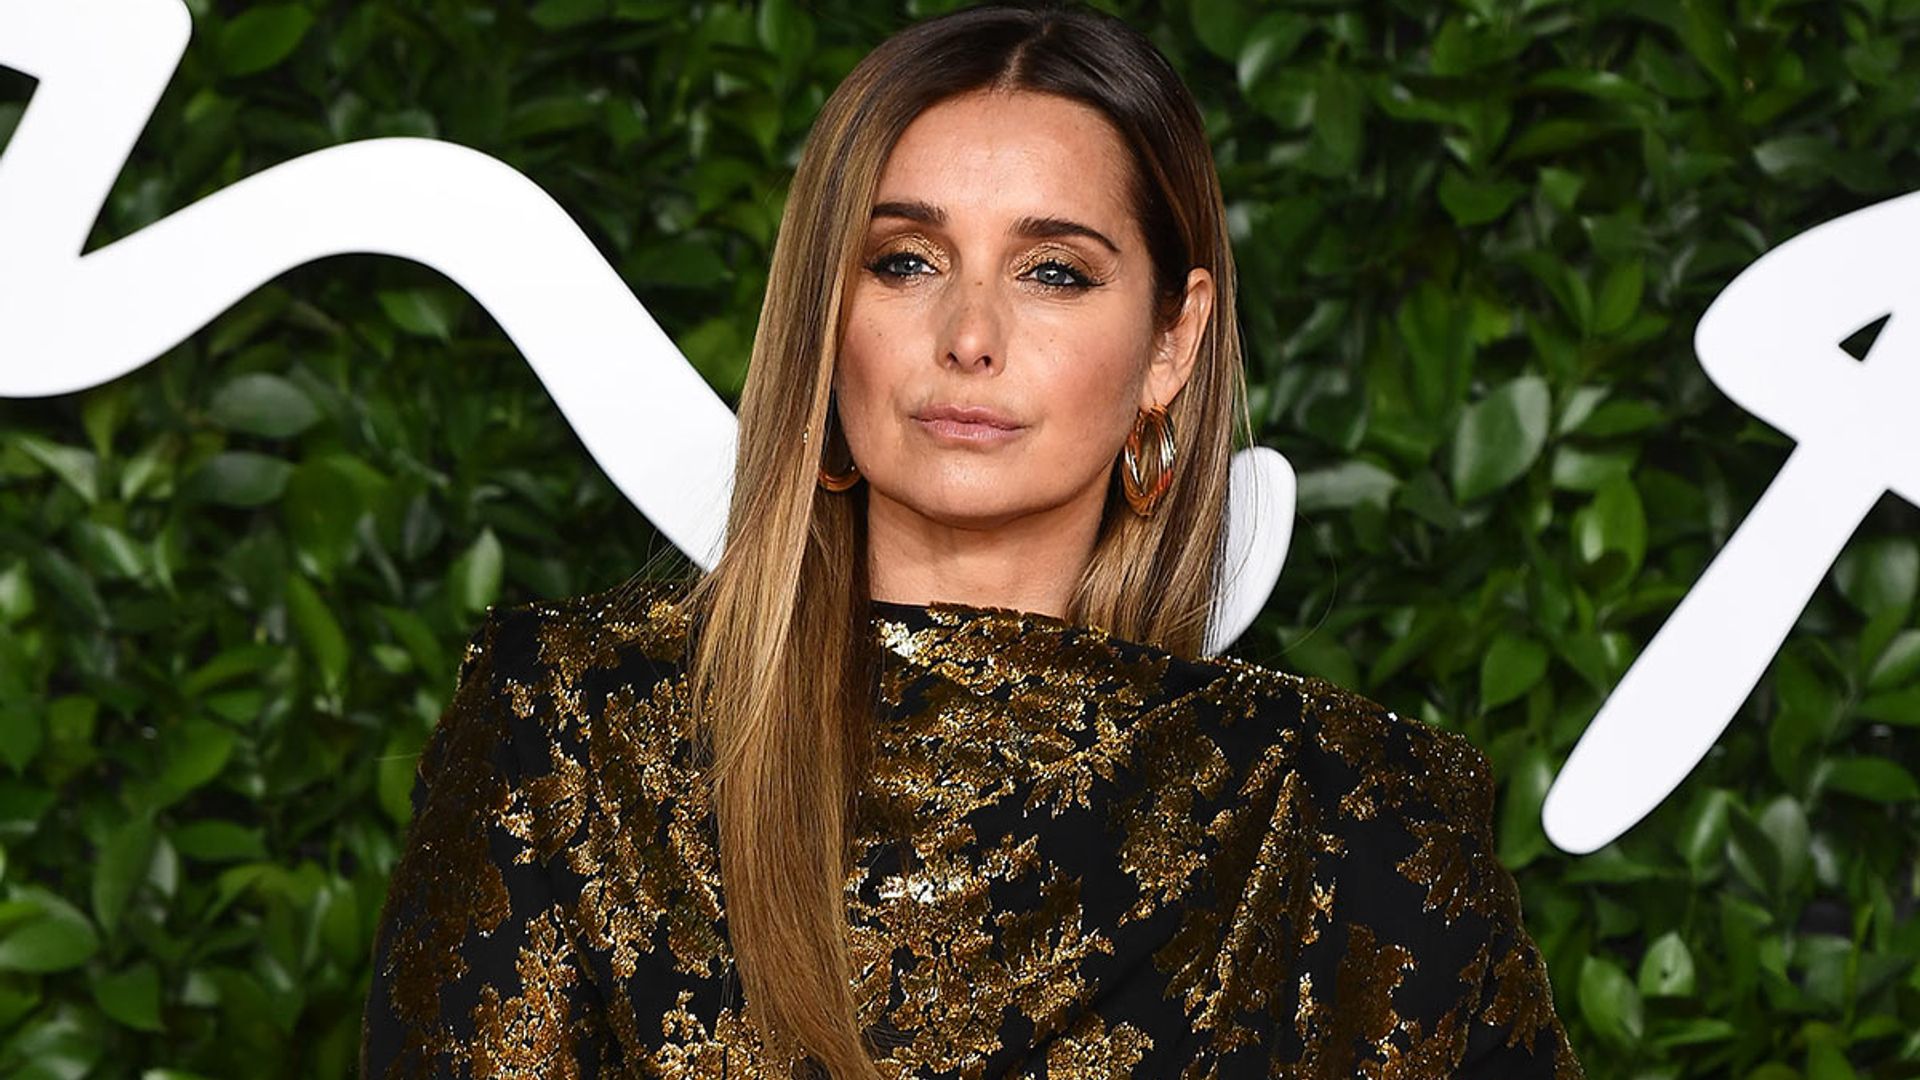 Louise Redknapp stuns in leather jacket for special anniversary